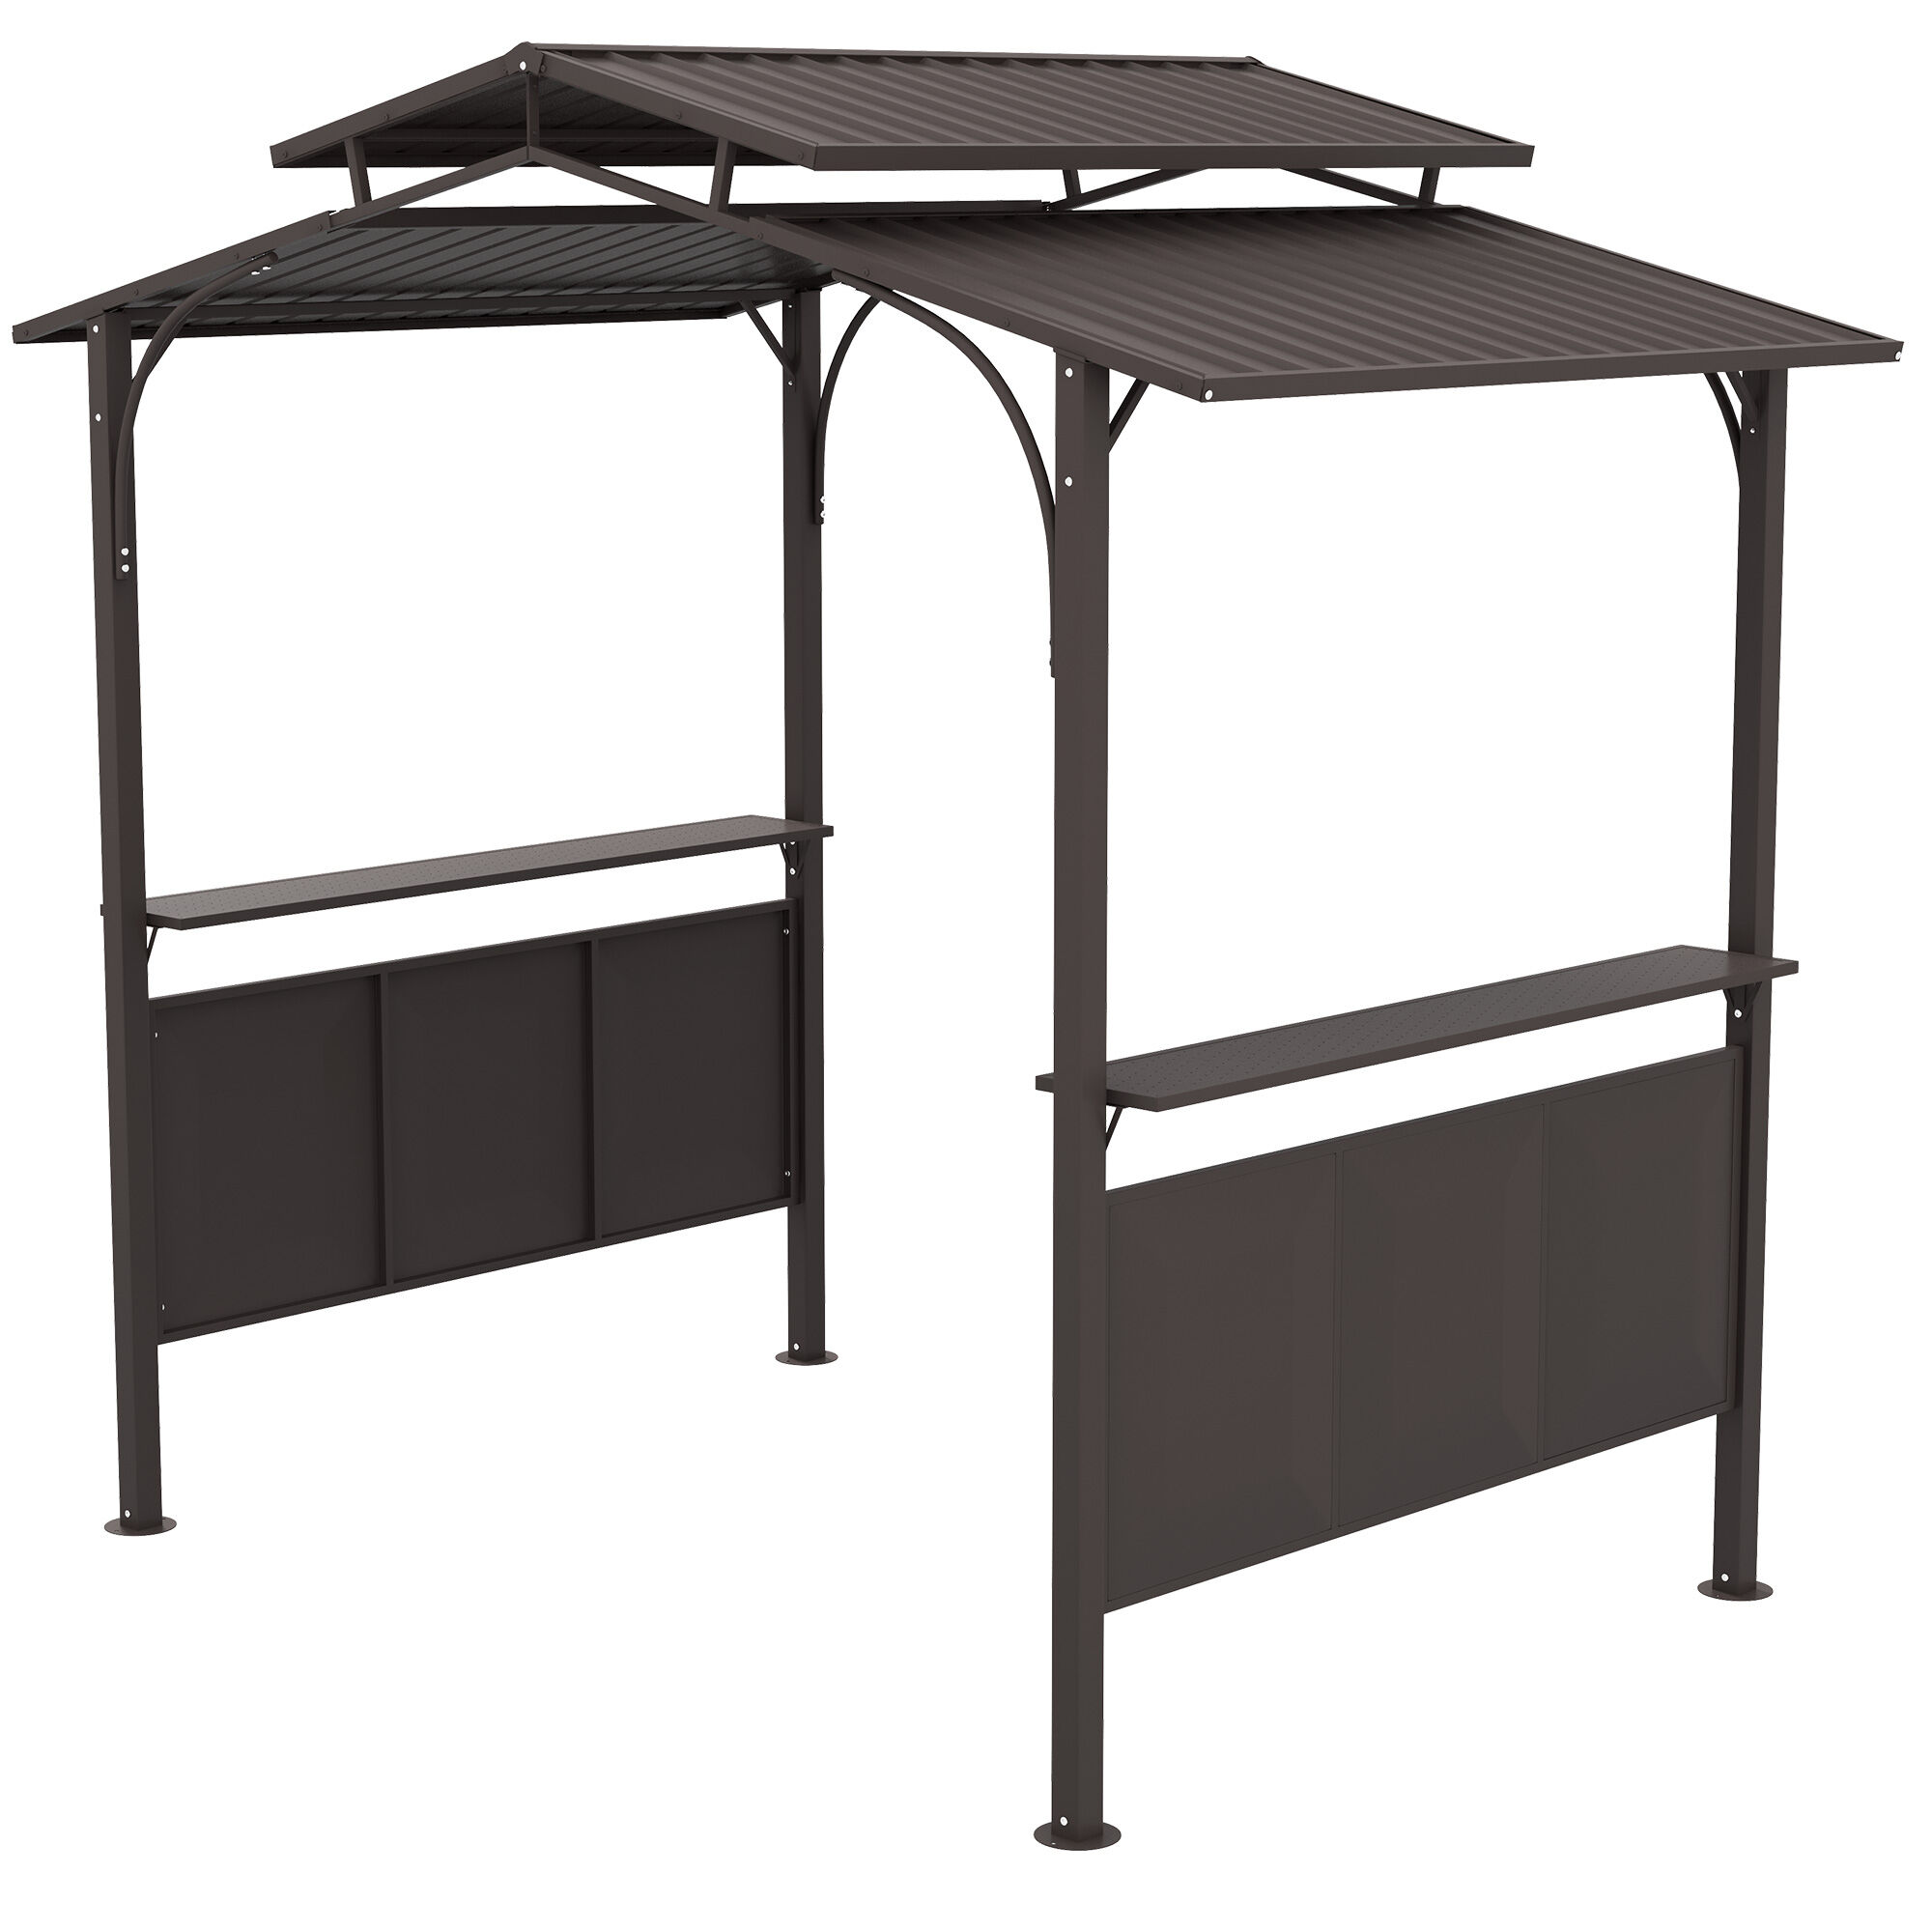 Outsunny 8' x 5' BBQ Grill Gazebo, Outdoor Double Tiered Interlaced Polycarbonate Roof with Steel Frame & 2 Side Shelves, Brown